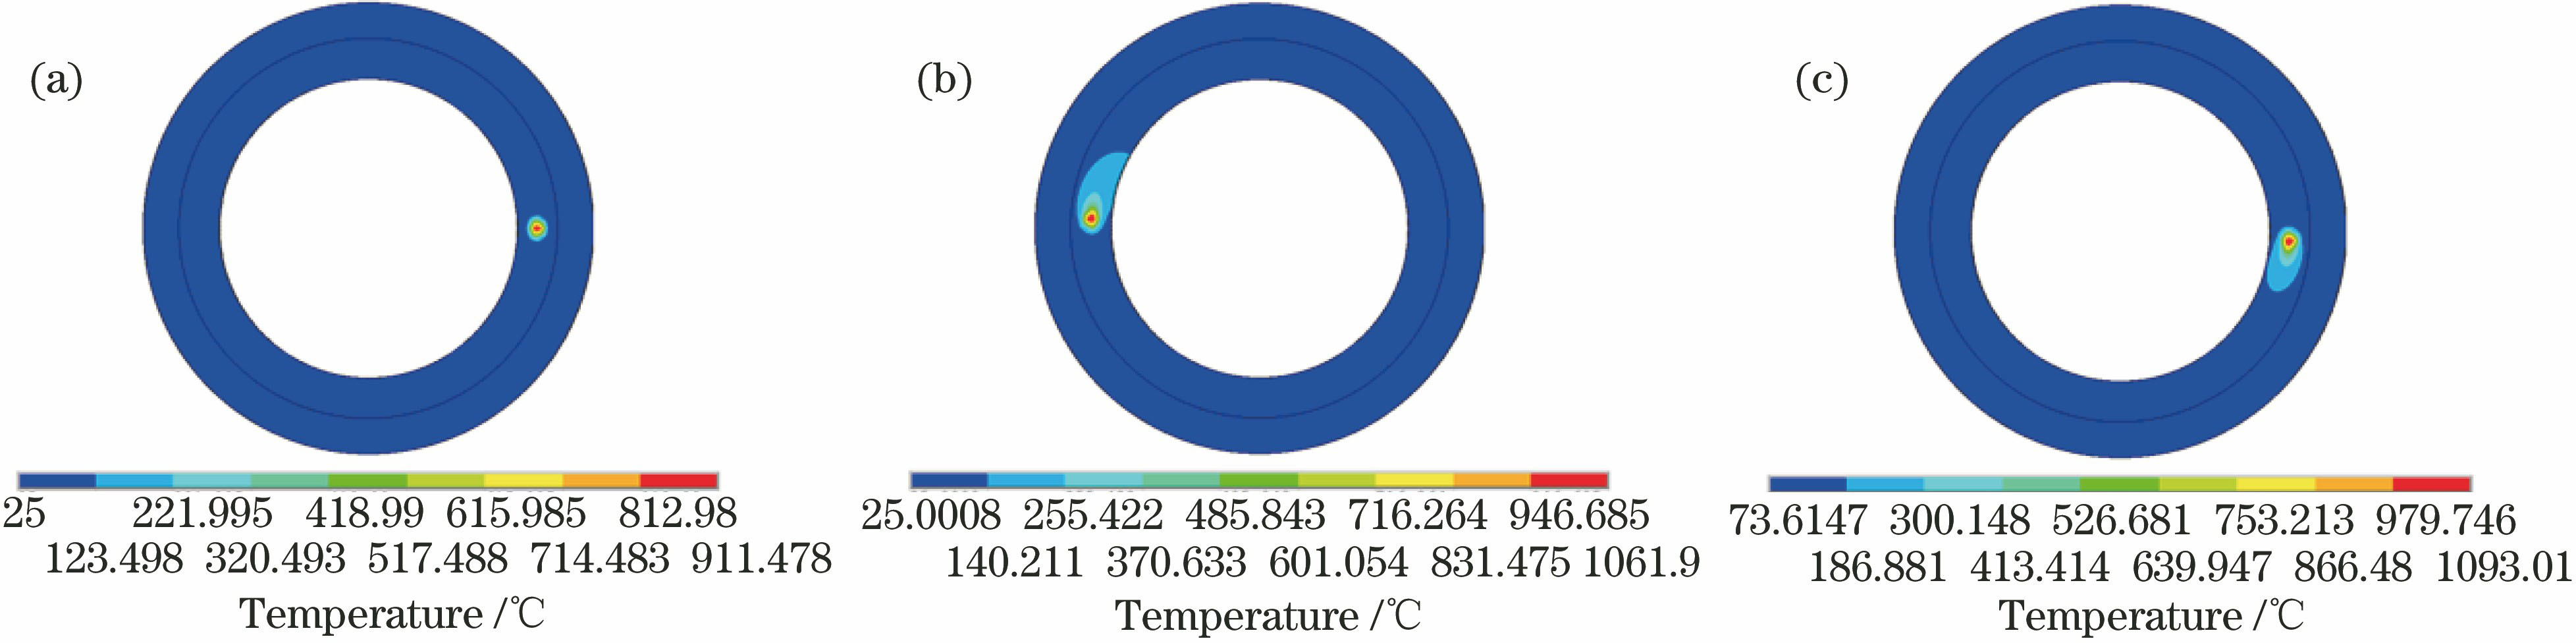 Temperature field of laser phase-transformation hardening of valve seat versus time. (a) t=0.09 s; (b) t=5.4 s; (c) t=10.8 s